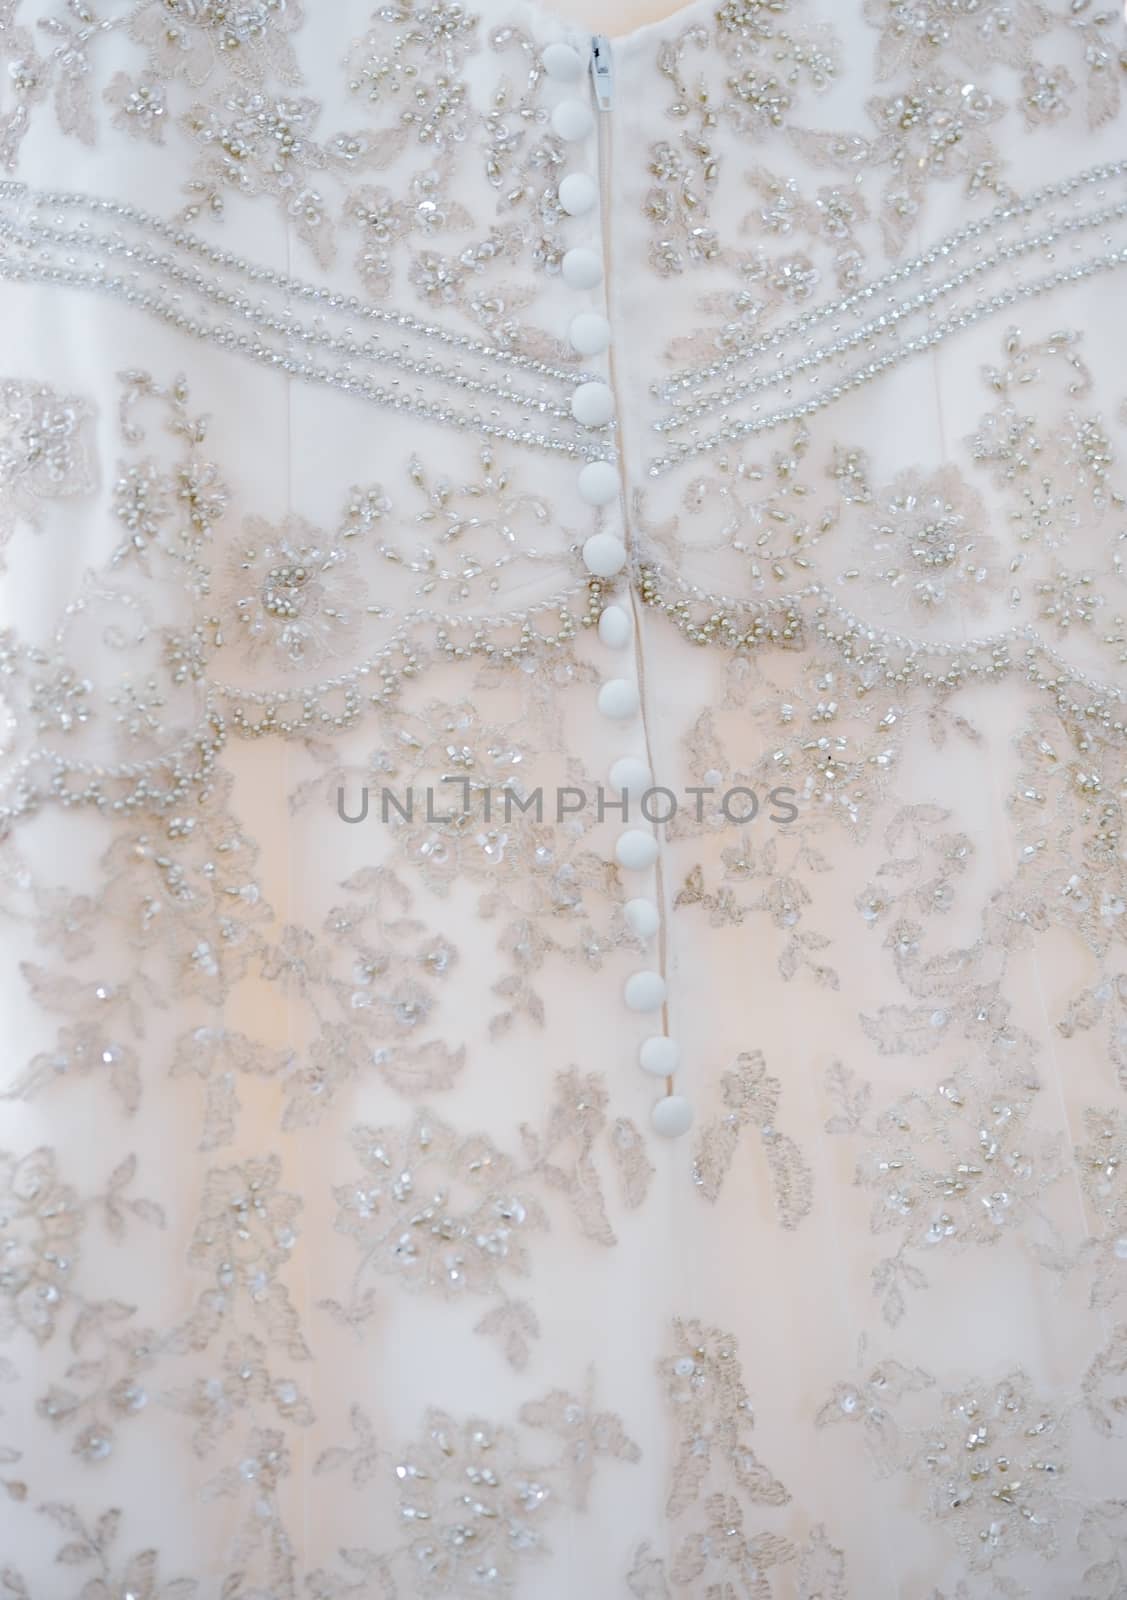 Brides dress detail by kmwphotography